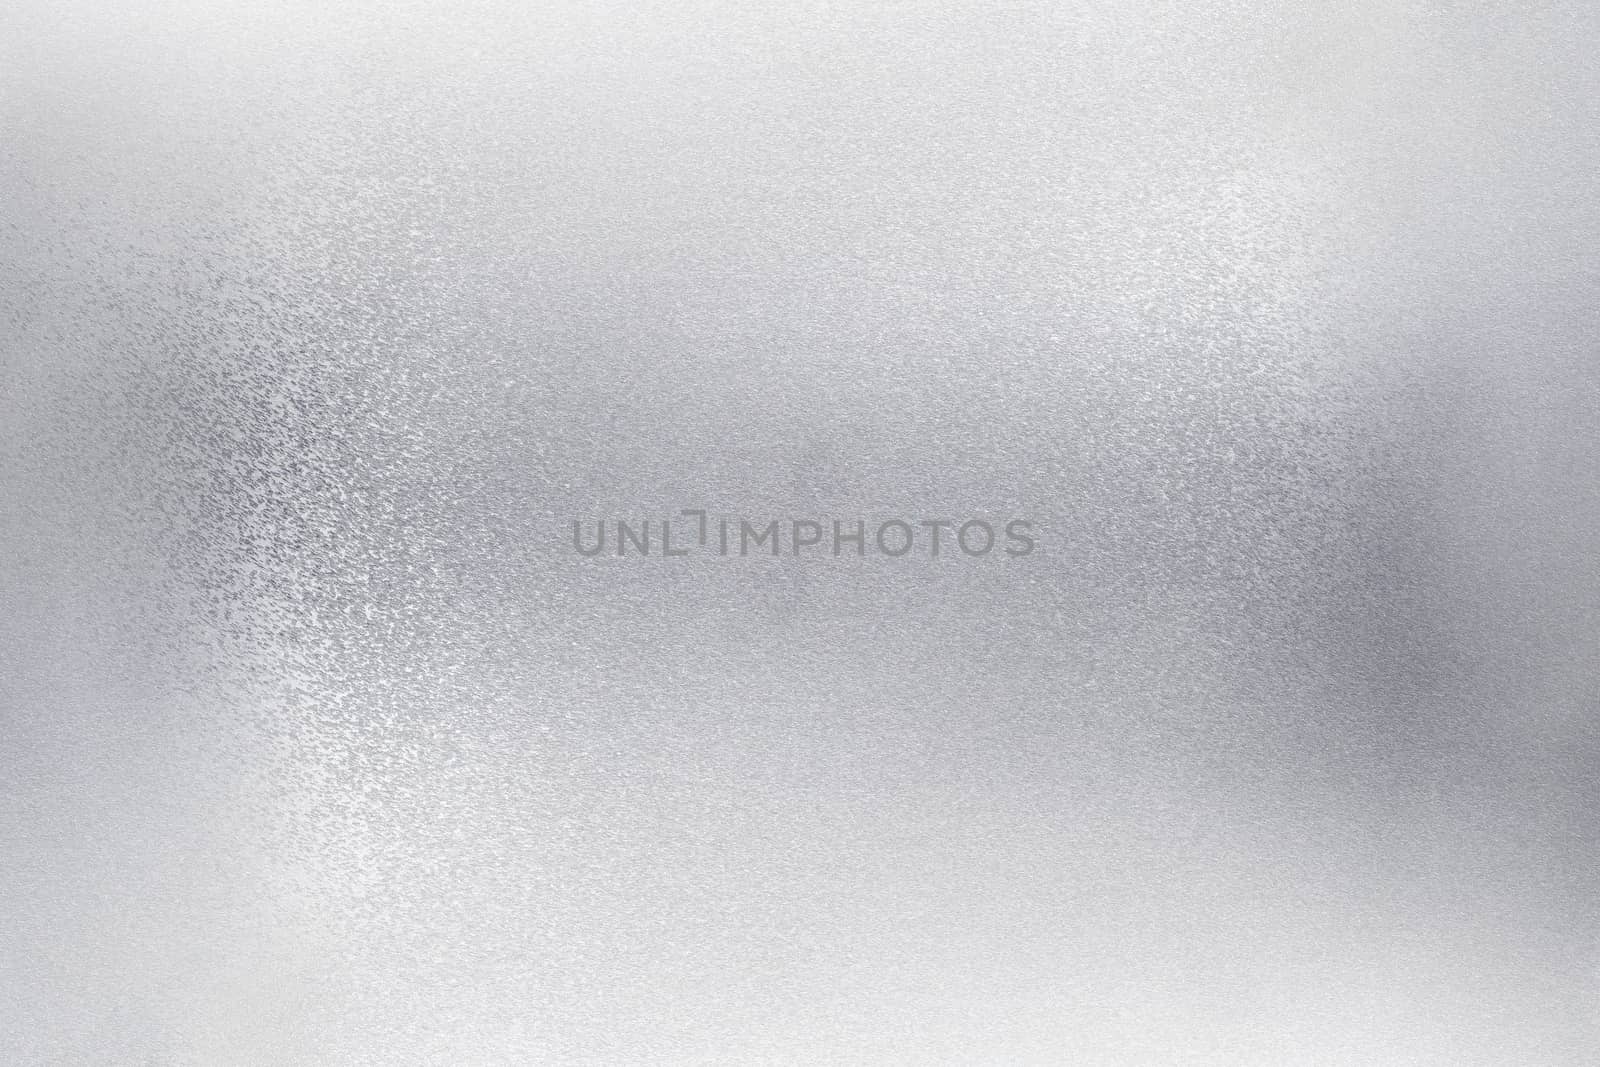 Glowing brushed silver foil metallic wall, abstract texture background